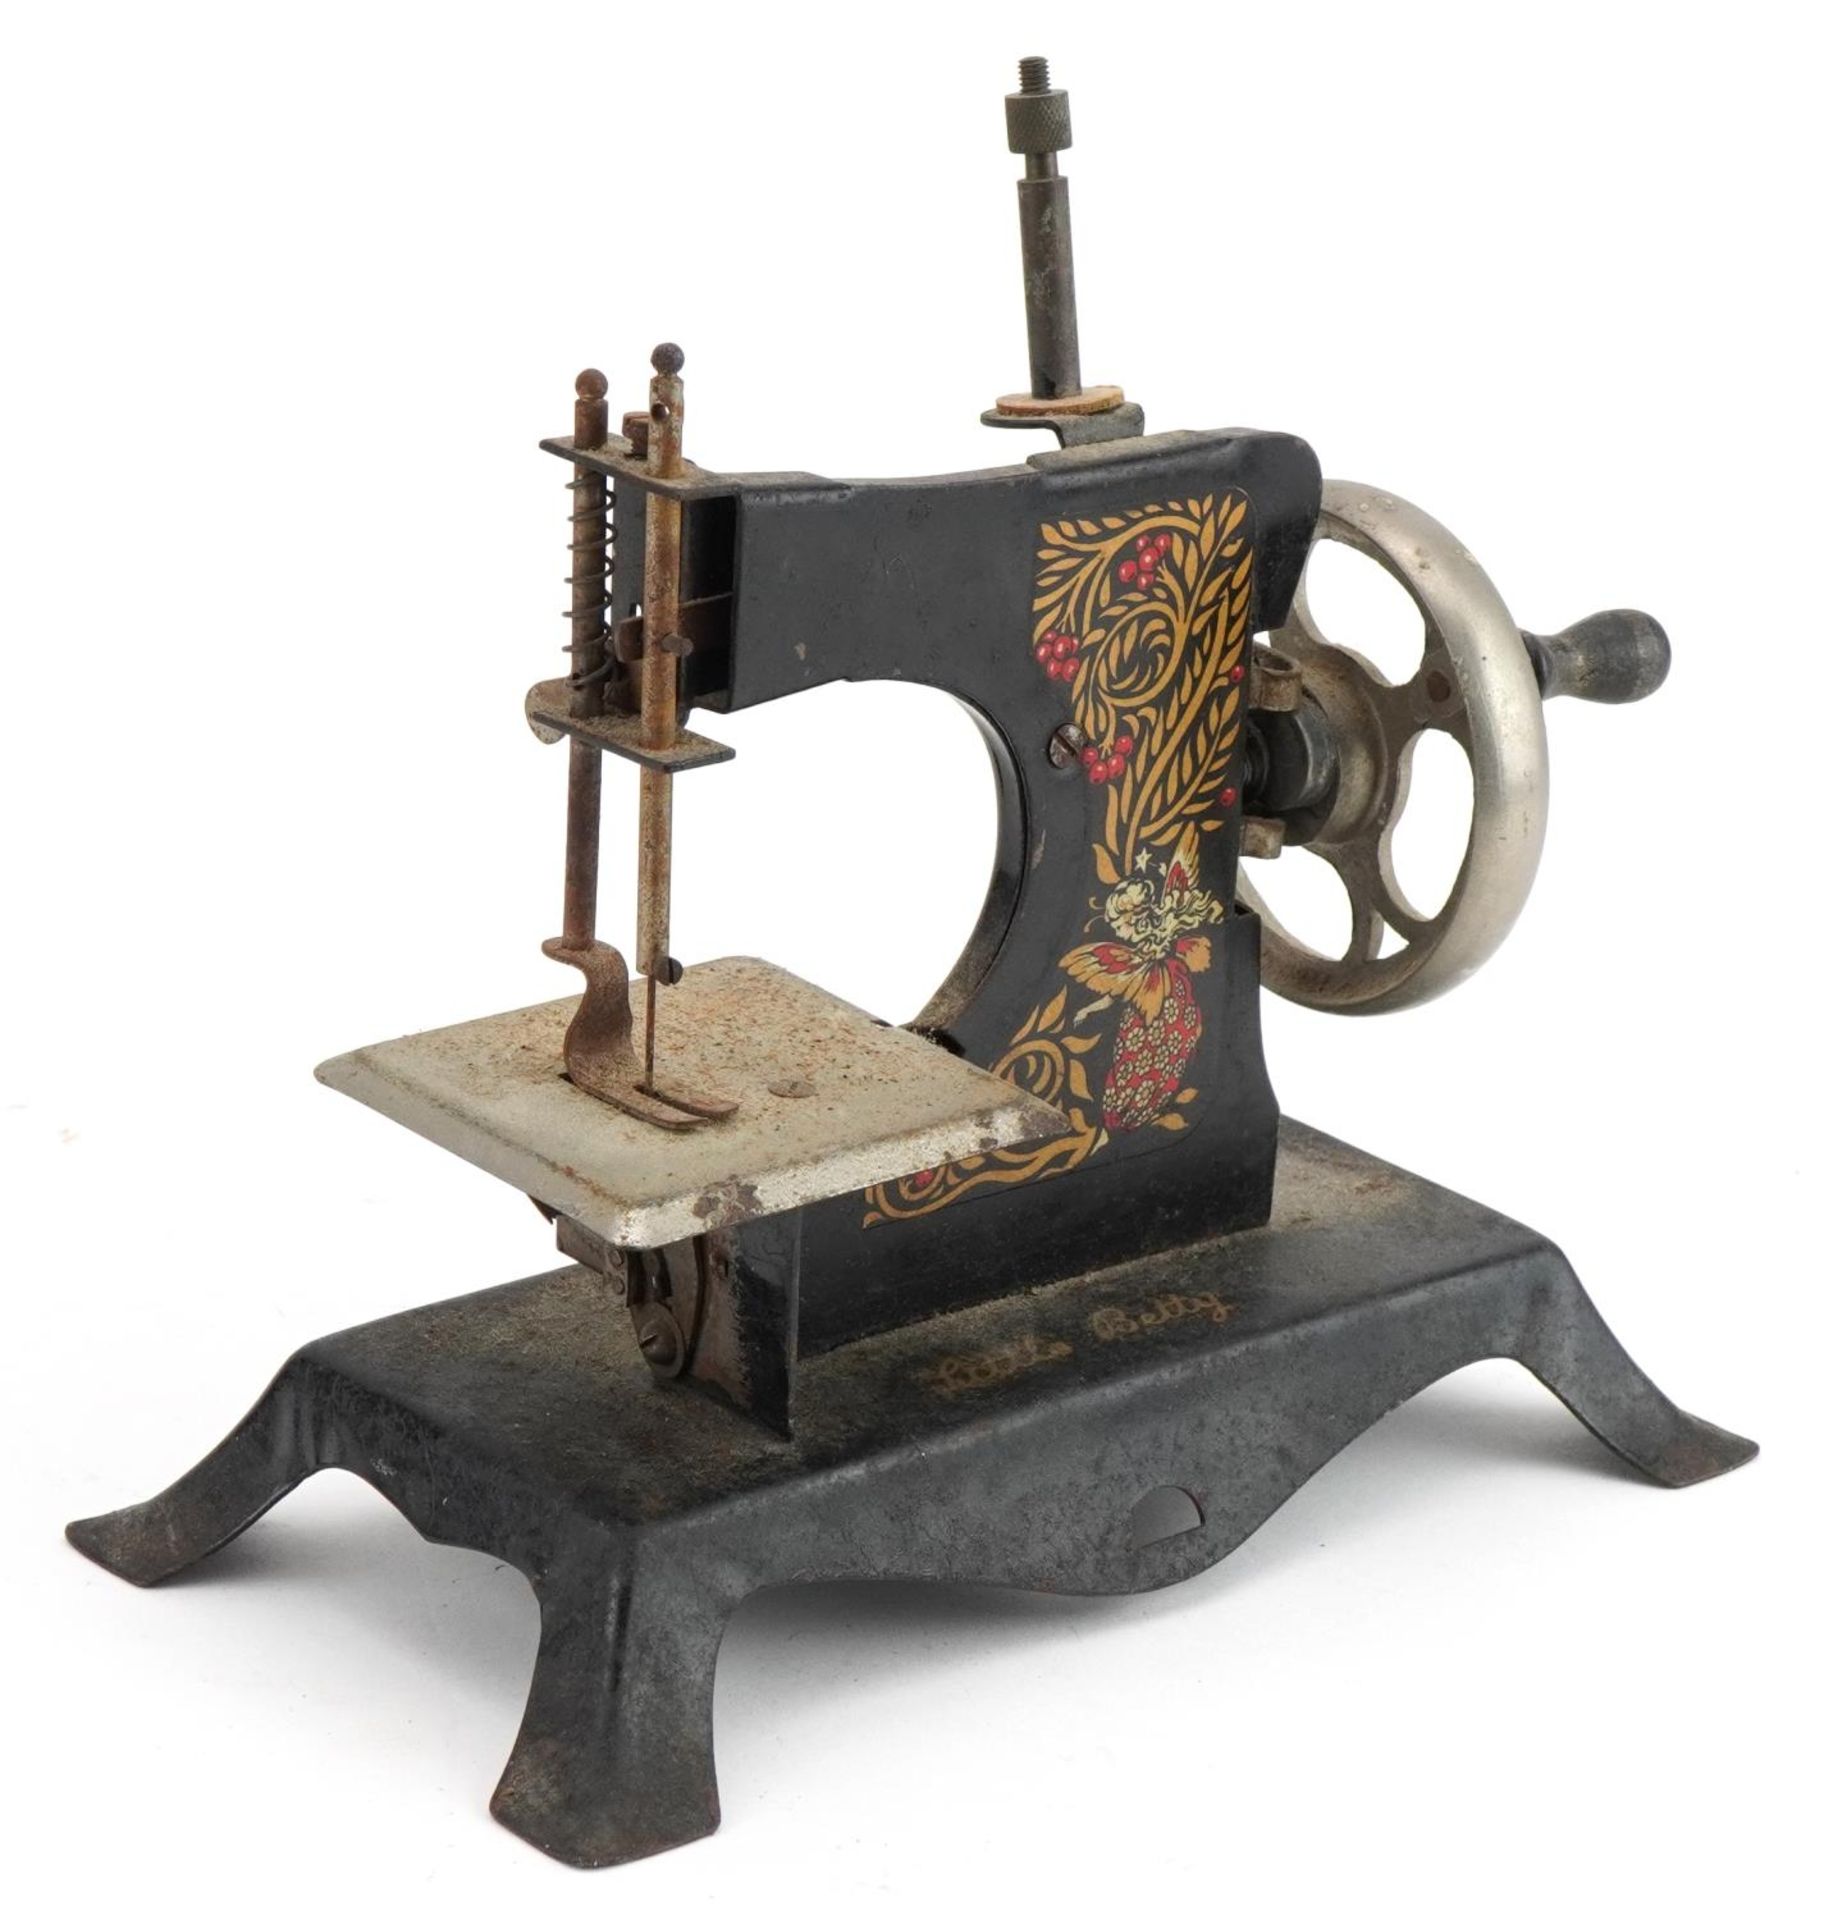 Early 20th century tinplate Little Betty child's sewing machine, 20cm in length : For further